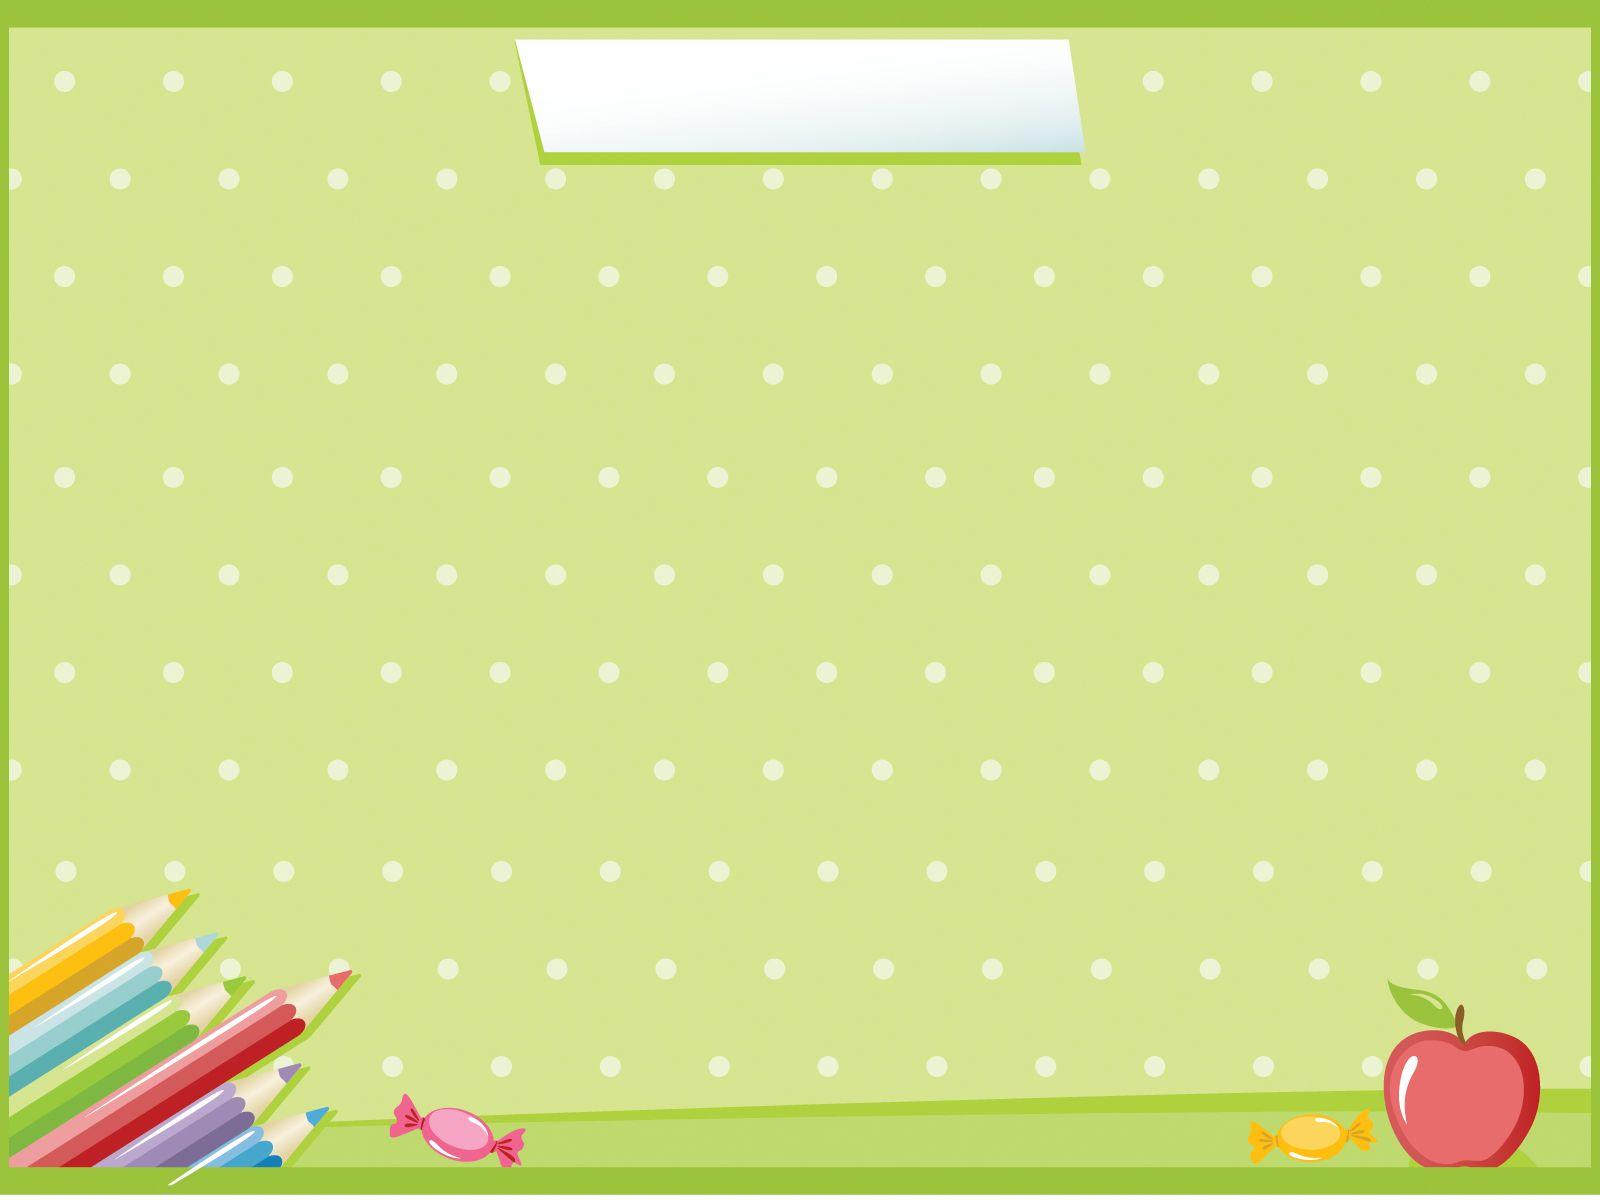 Ppt Backgrounds For School - Wallpaper Cave